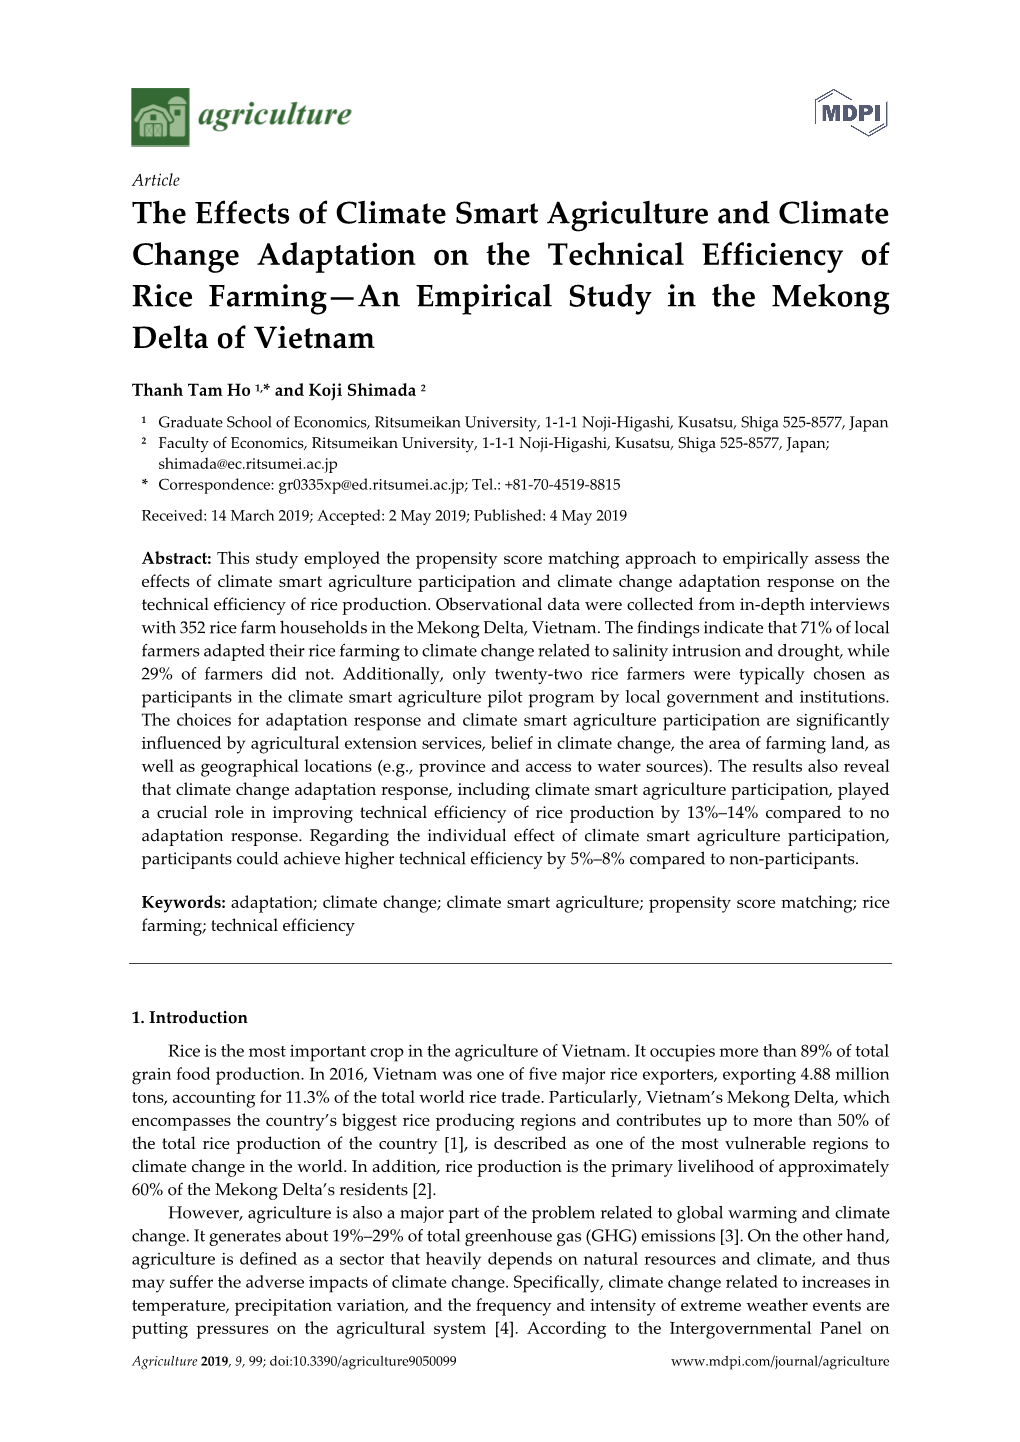 The Effects of Climate Smart Agriculture and Climate Change Adaptation on the Technical Efficiency of Rice Farming—An Empirical Study in the Mekong Delta of Vietnam